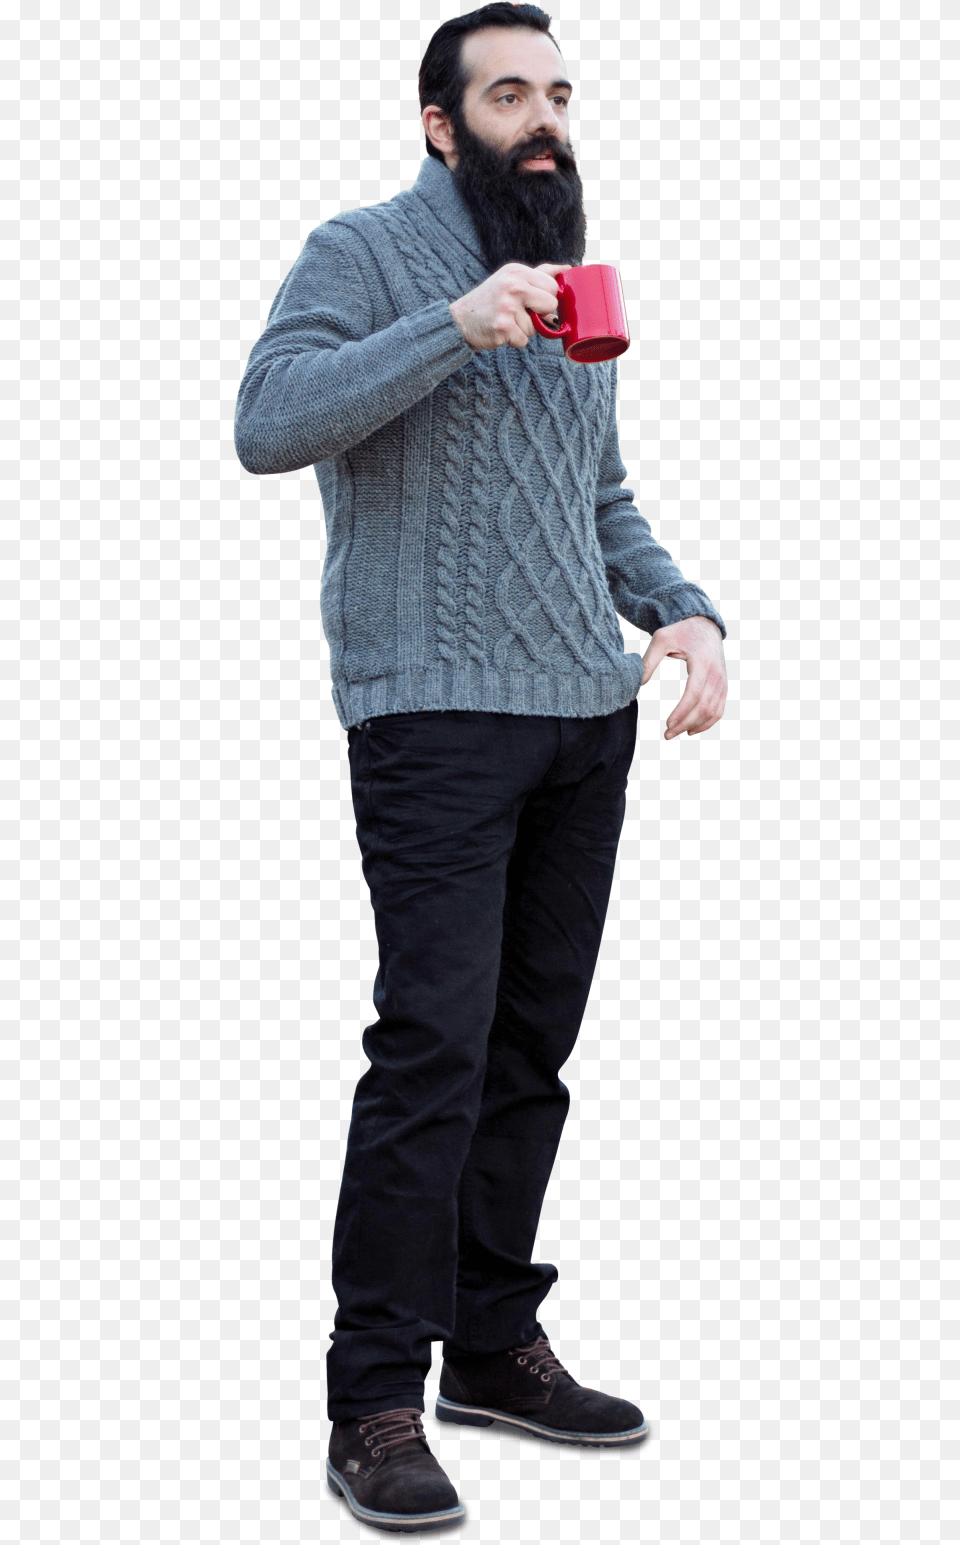 Drinking Coffee Cut Out People Drinking, Sweater, Clothing, Knitwear, Person Png